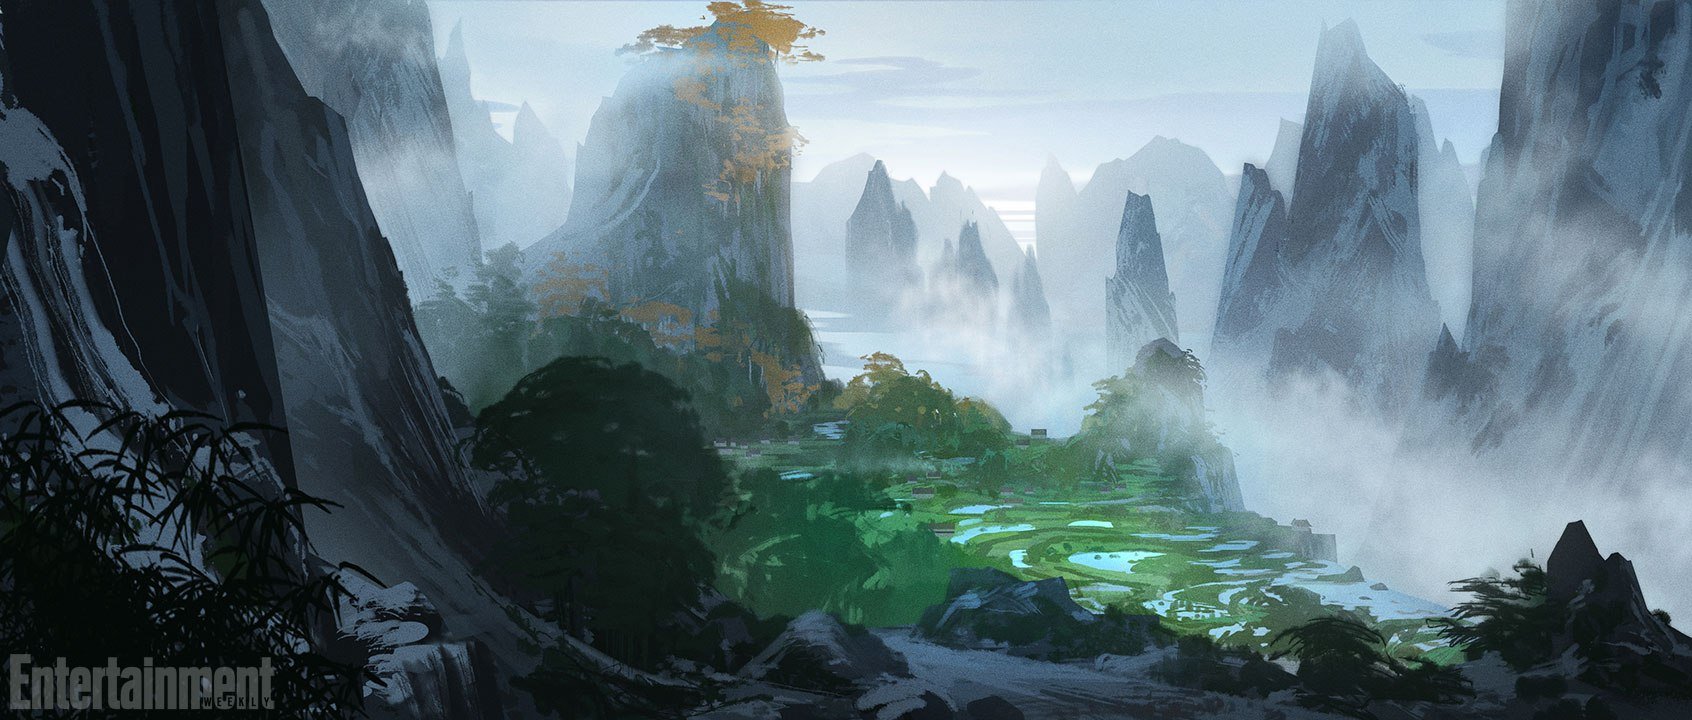 LOOK: DreamWorks Animation Releases 'Kung Fu Panda 3' Concept Art. Animation World Network